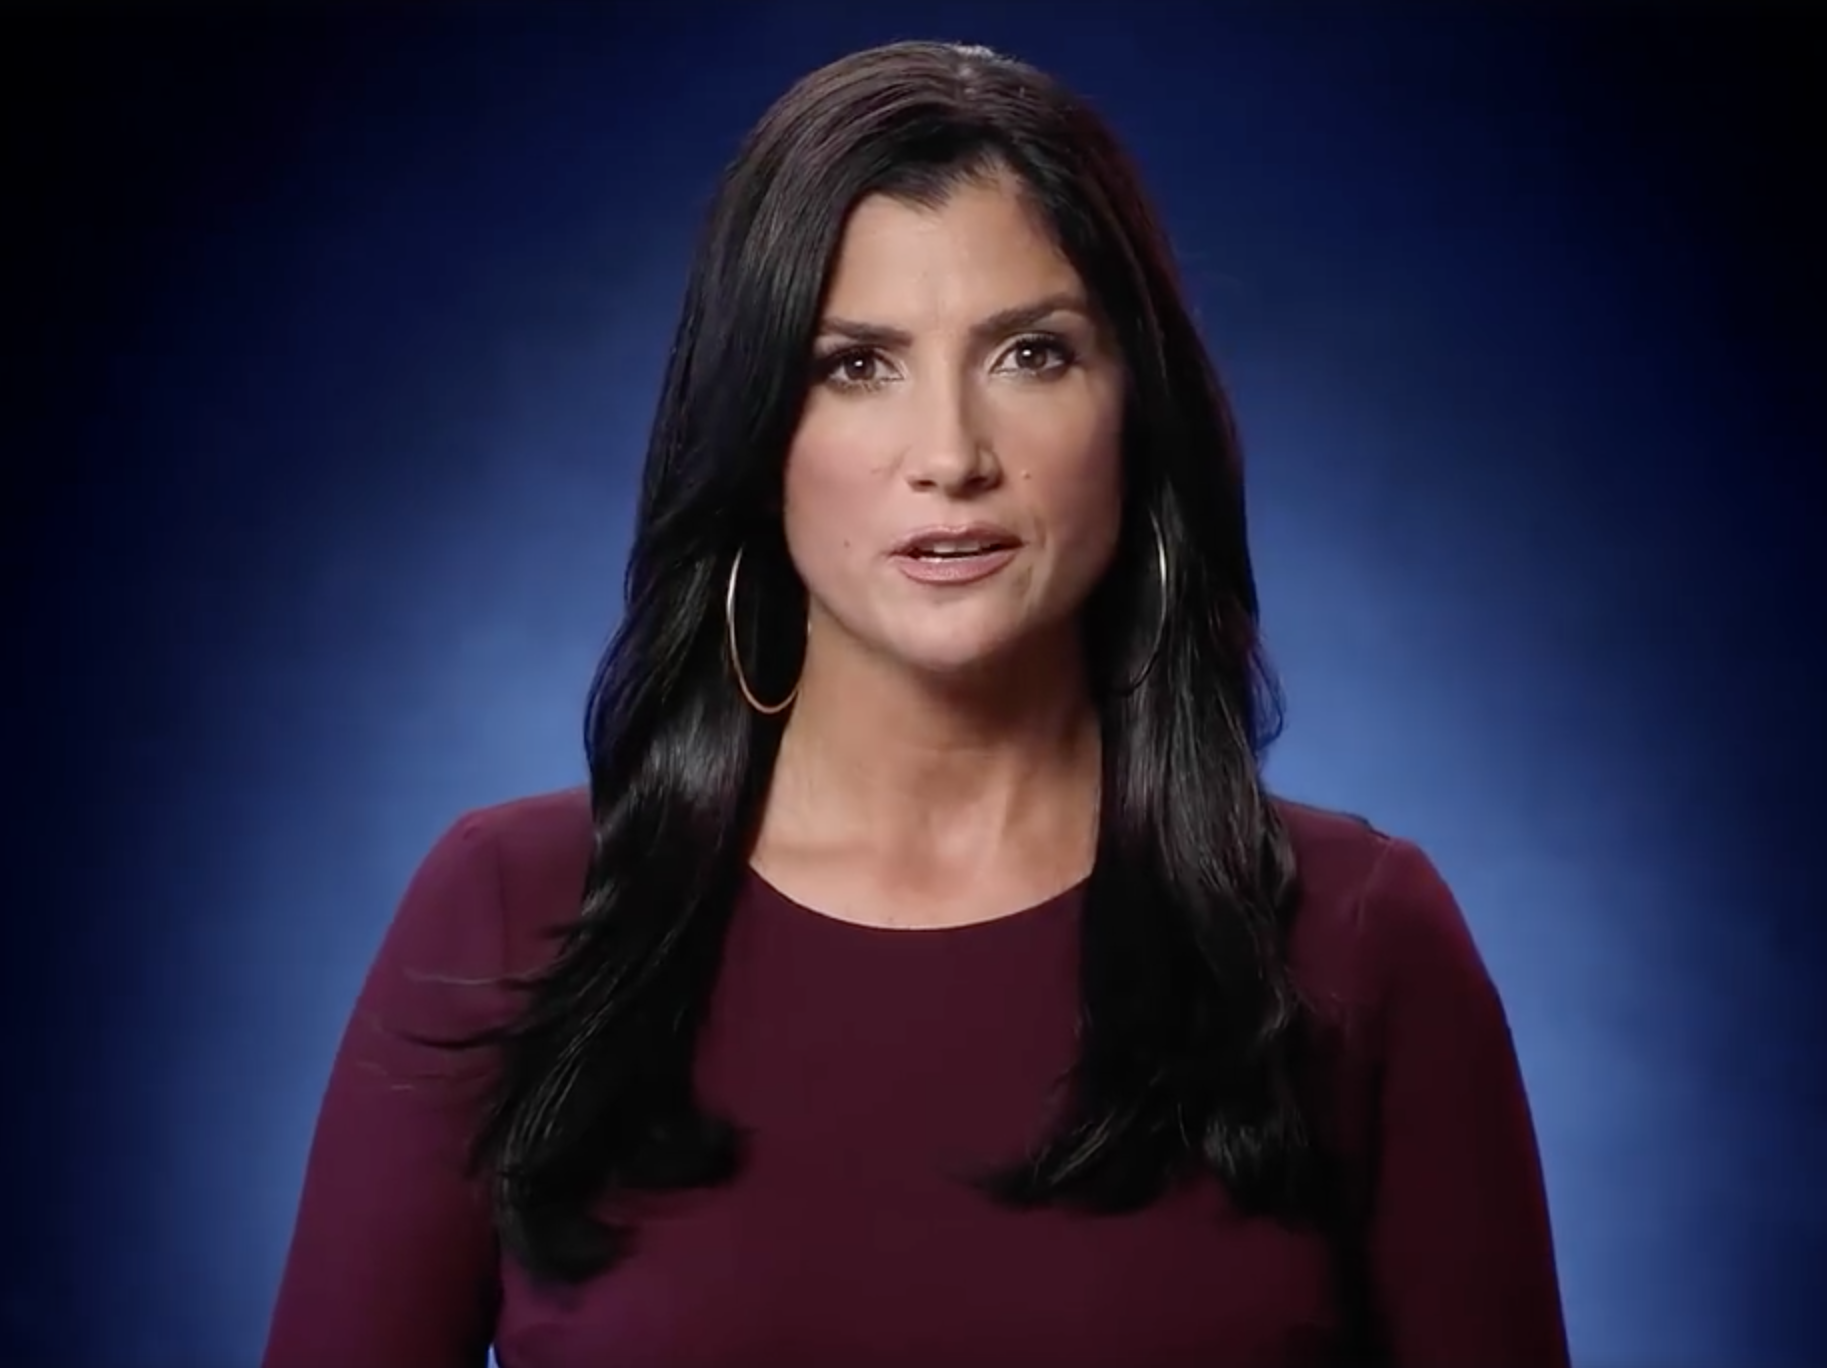 Radio host Dana Loesch appears in a controversial new National Rifle Association advertisement